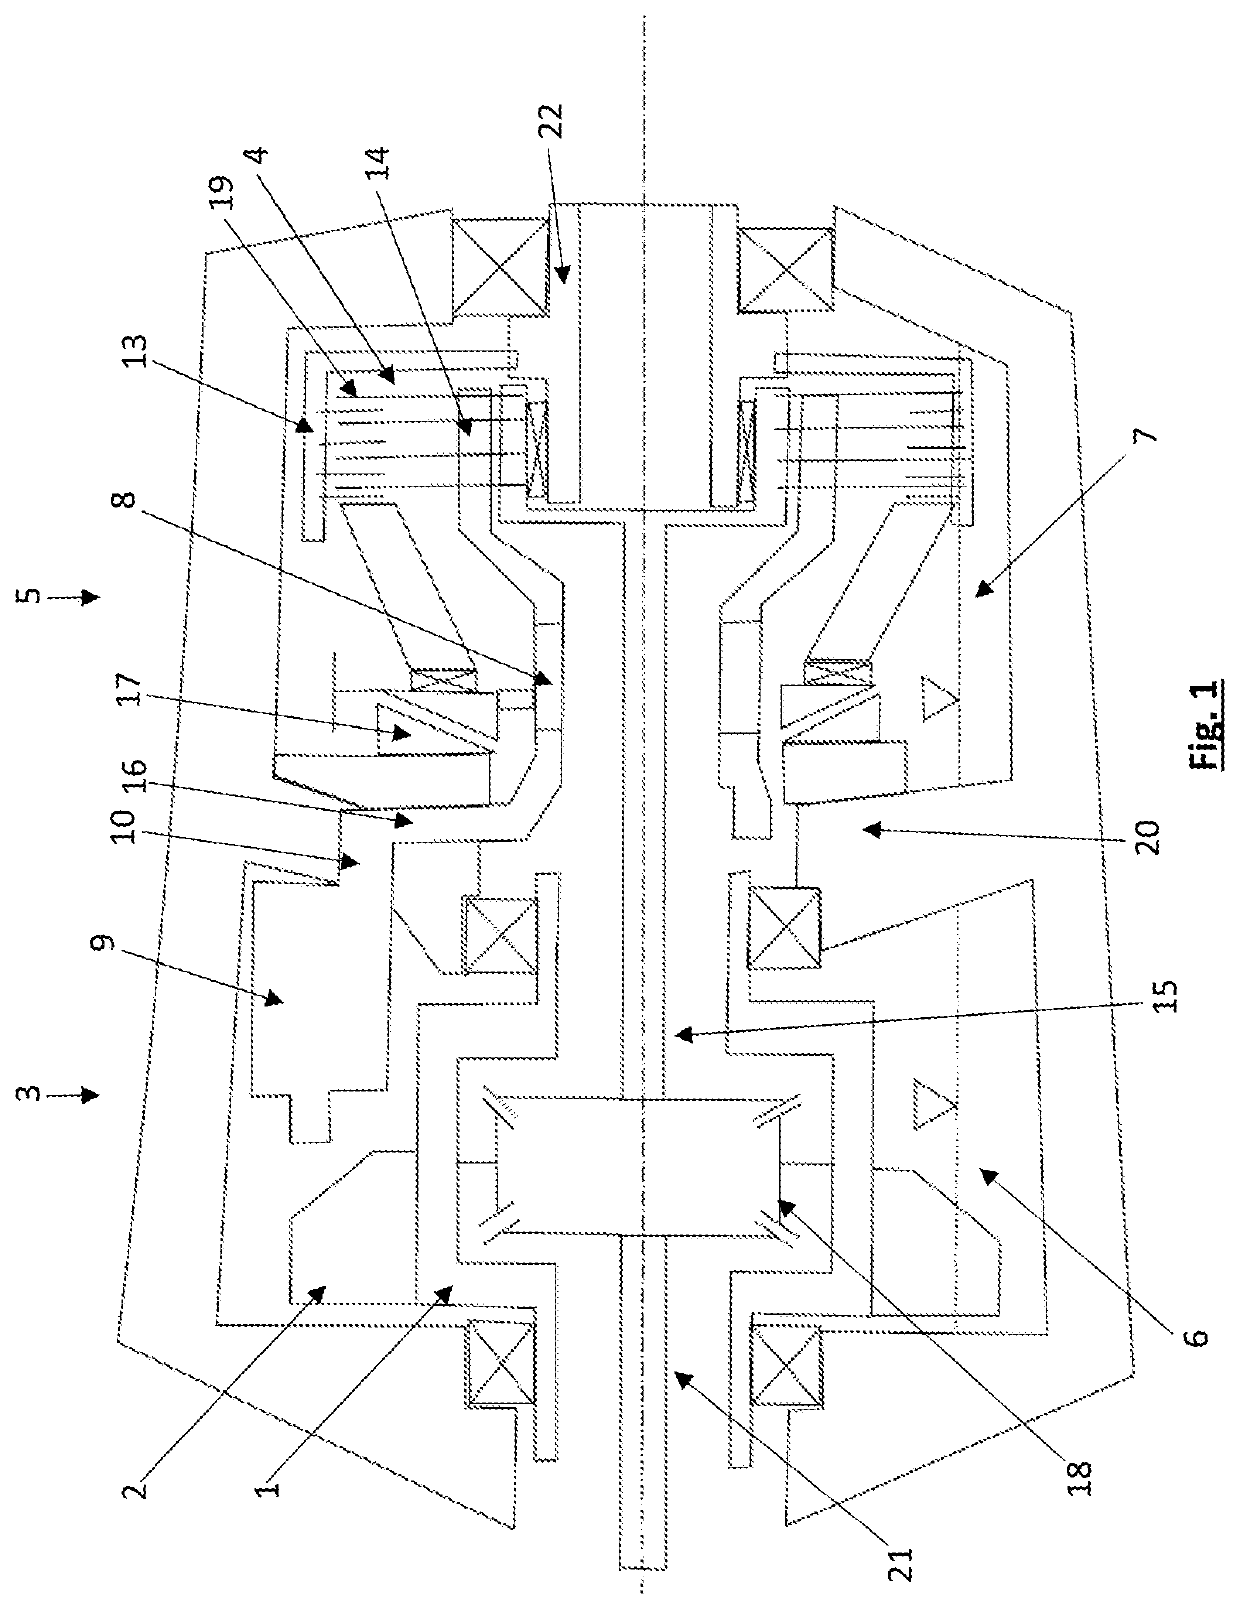 Transfer gearbox device